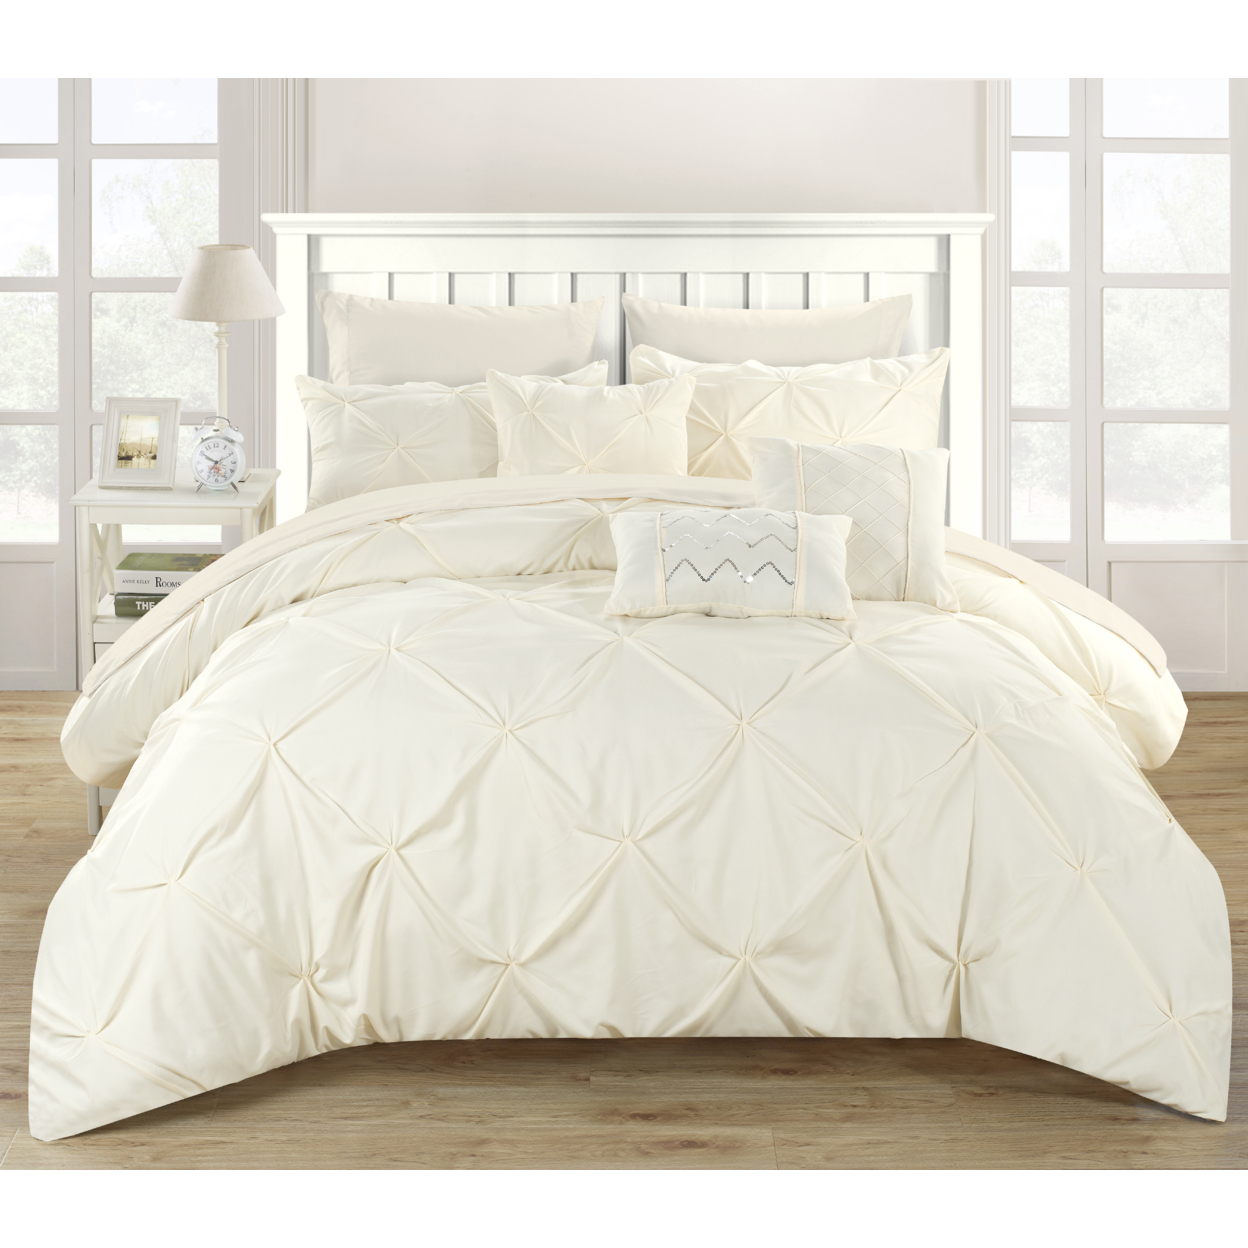 Chic Home Alvatore Pinch Pleated Bed in a Bag Comforter Set